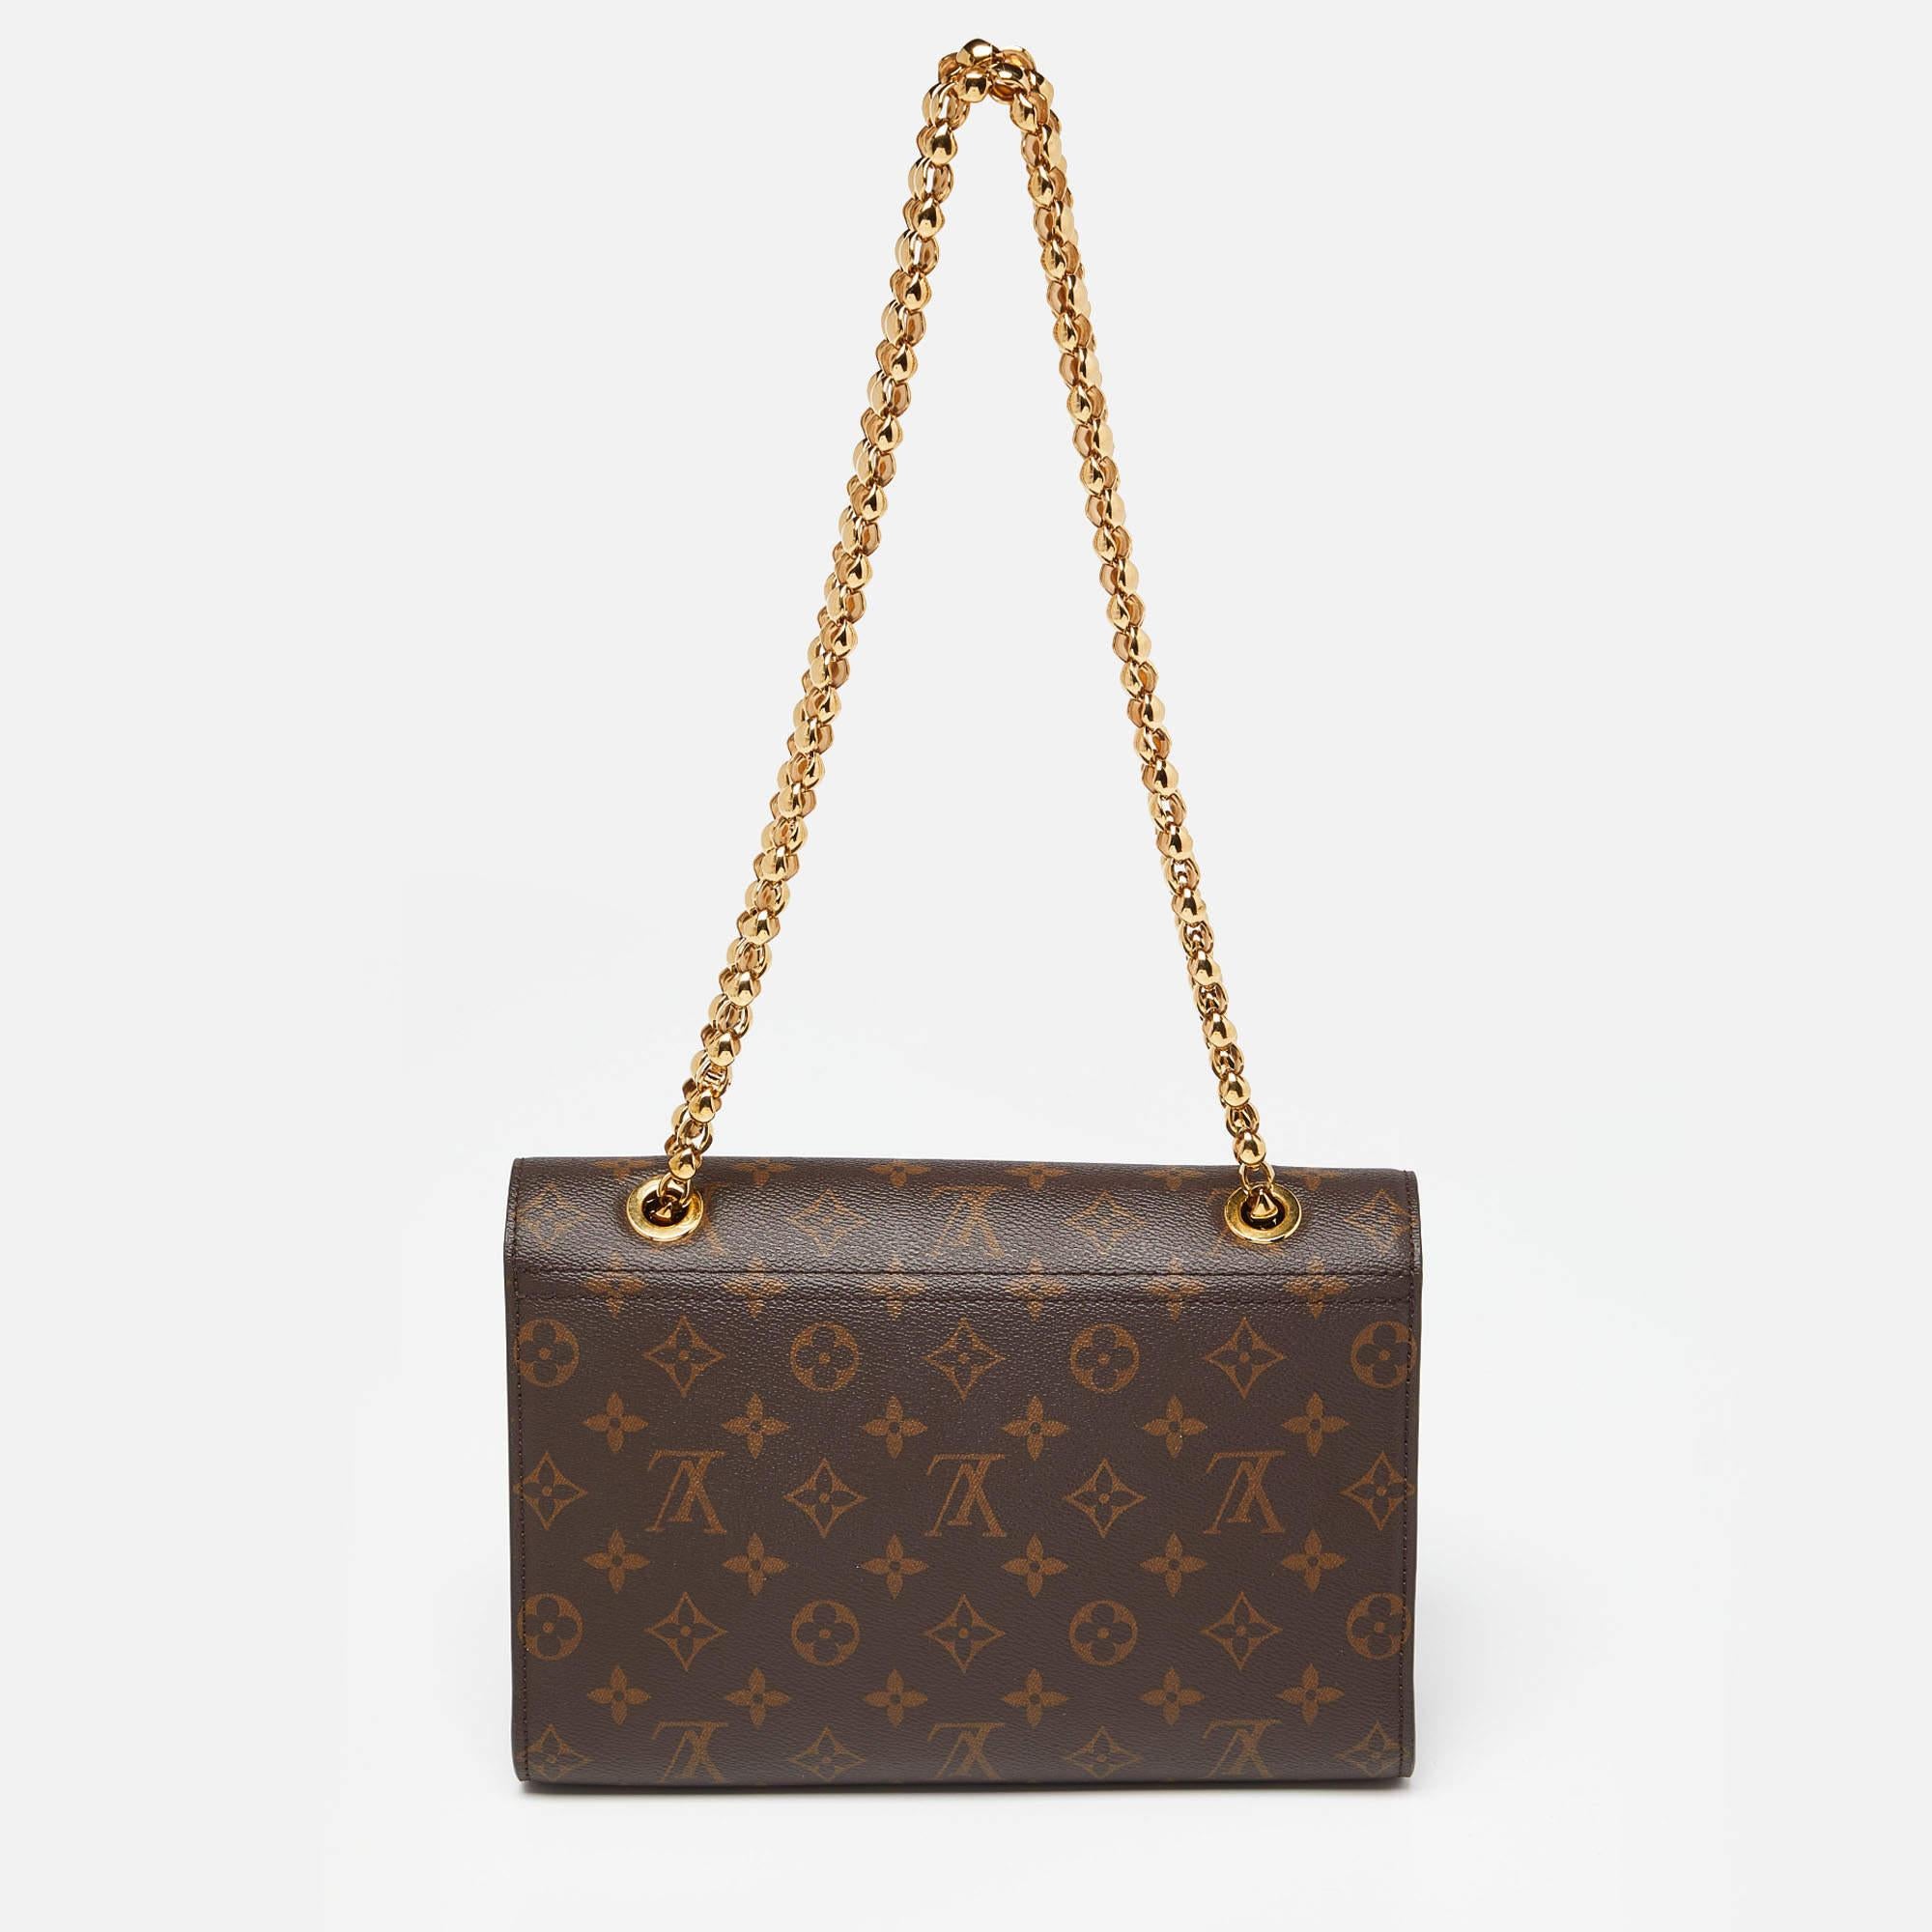 The excellent craftsmanship of this Victoire bag from Louis Vuitton ensures a brilliant finish and a rich appeal. It is crafted using Monogram canvas on the exterior and exhibits an Alcantara-lined interior, gold-tone hardware, and dual chain